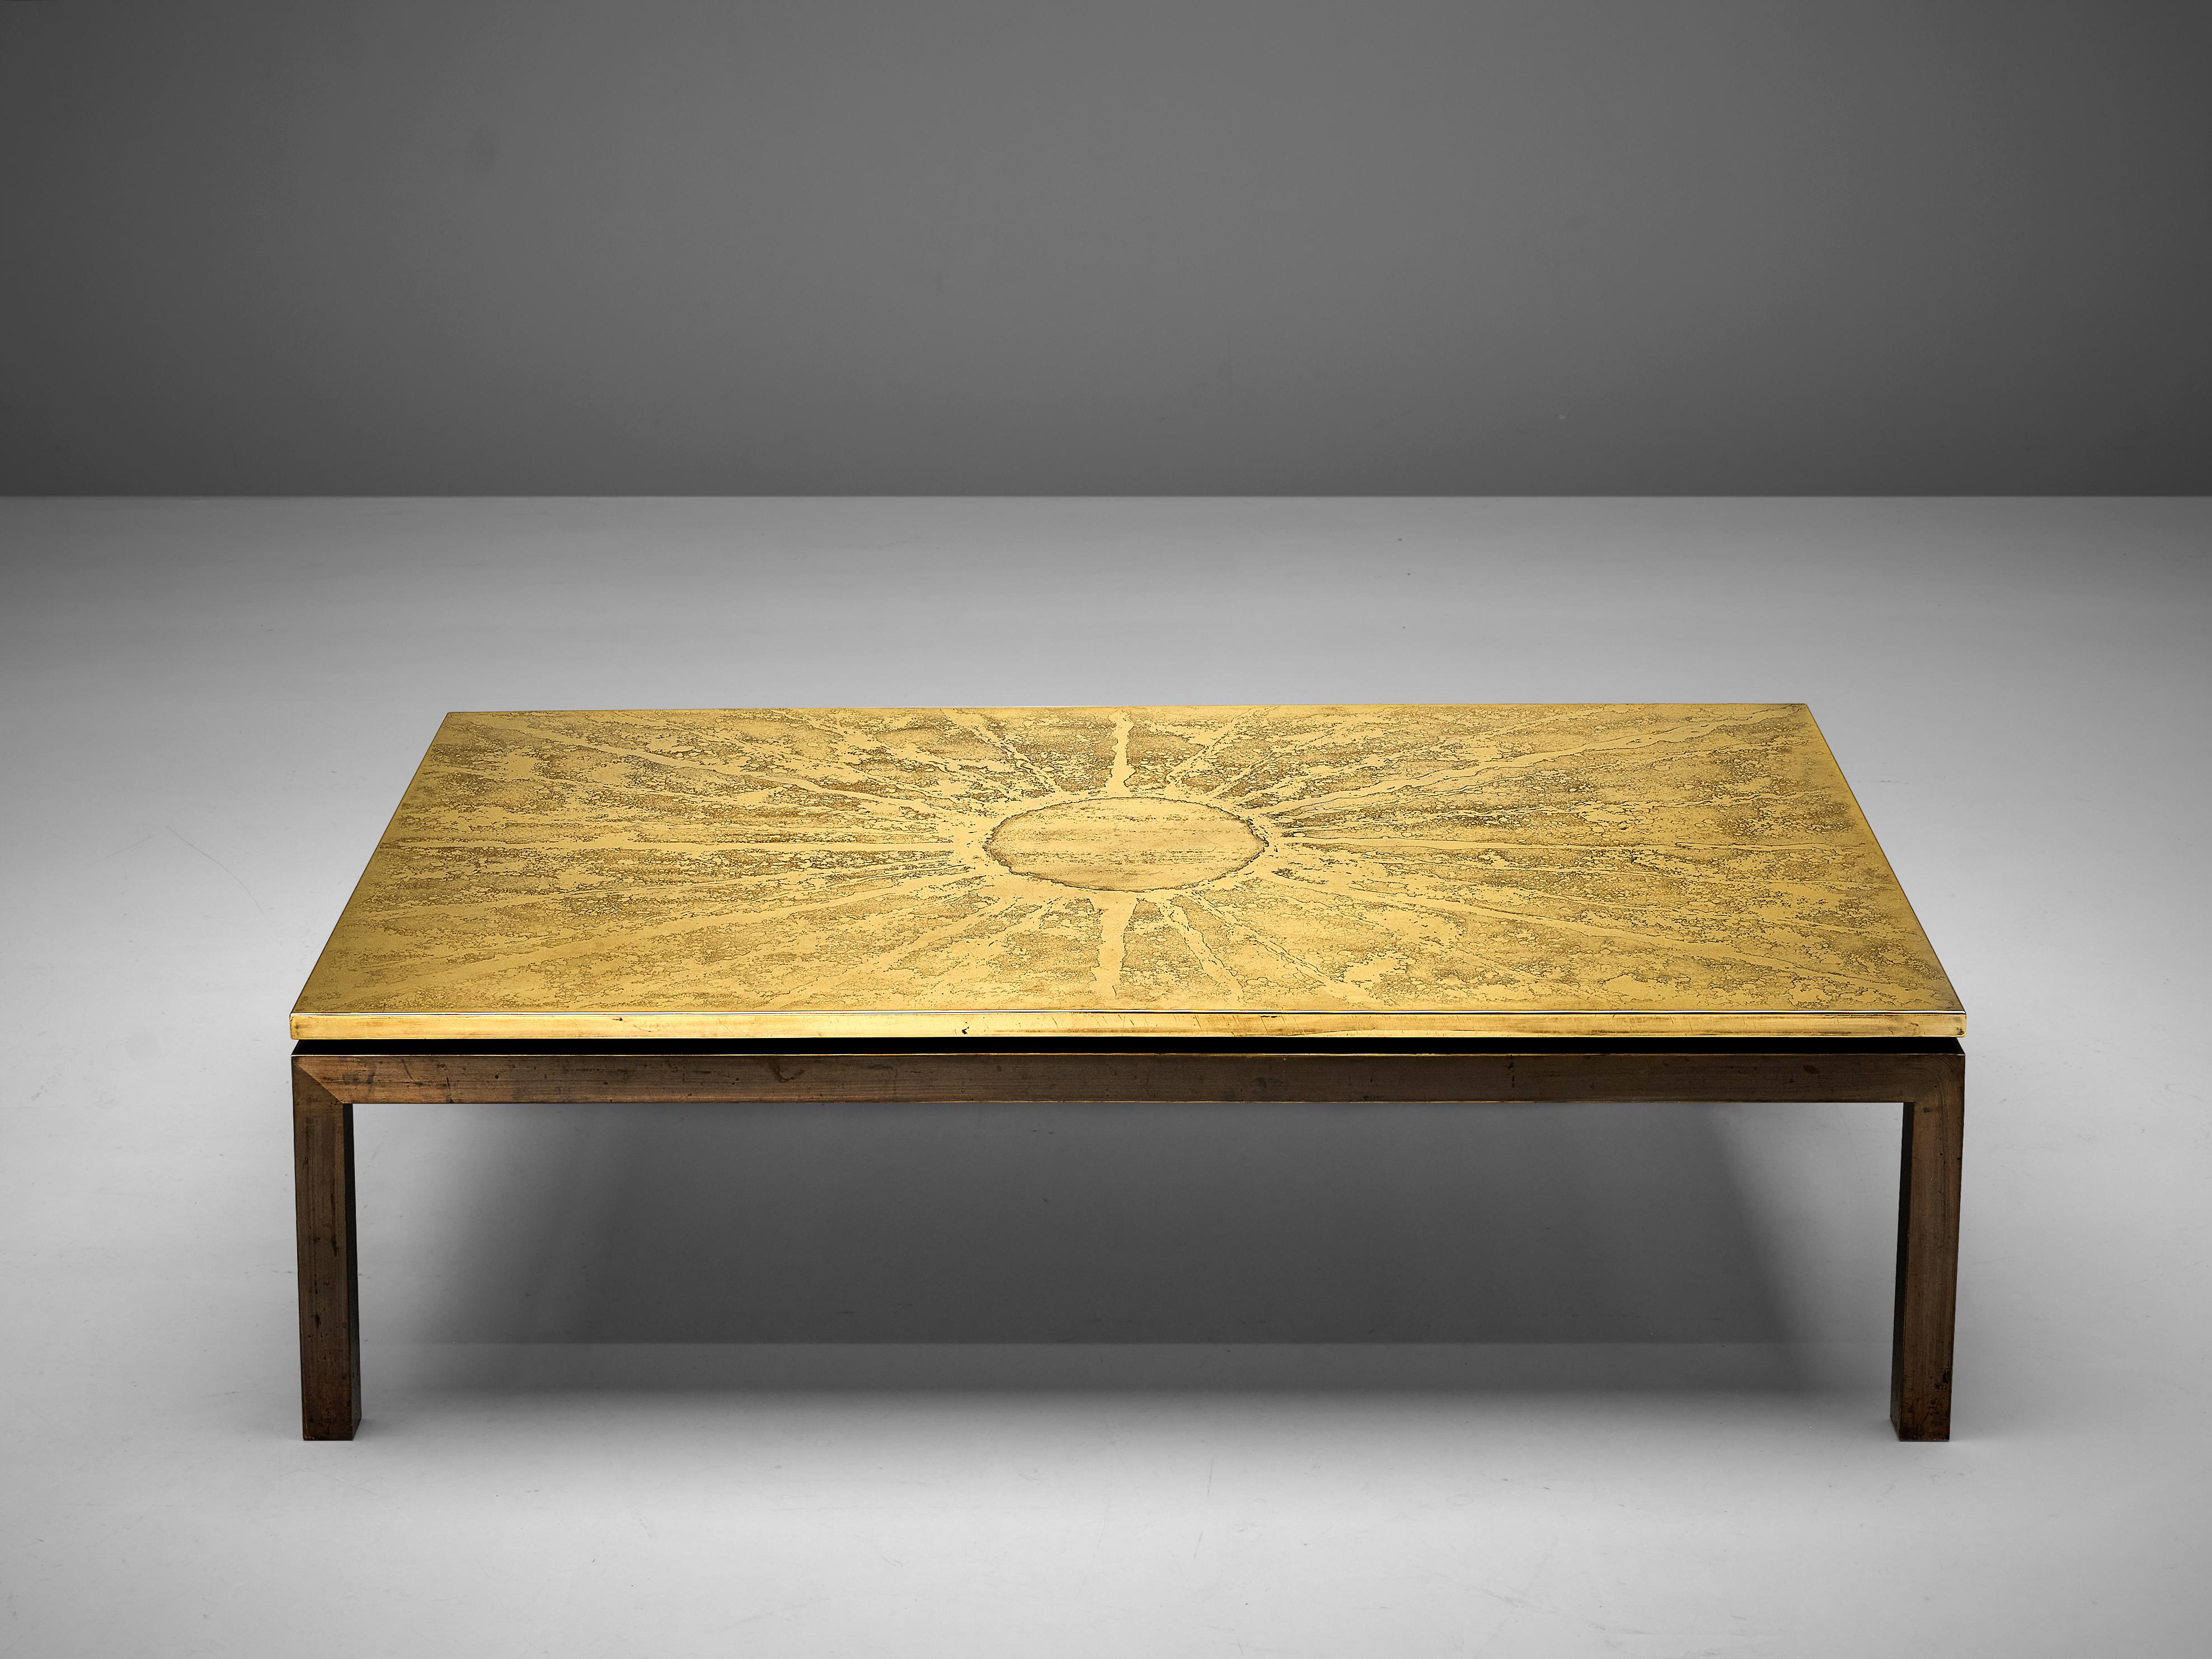 Coffee table, brass, metal, Belgium, 1970s

This hand-crafted Belgium side table has a grand appearance. The hand-etched tabletop in brass provides a wonderful abstract motive reminding of a sun. From a circle in the center many rays in vivid